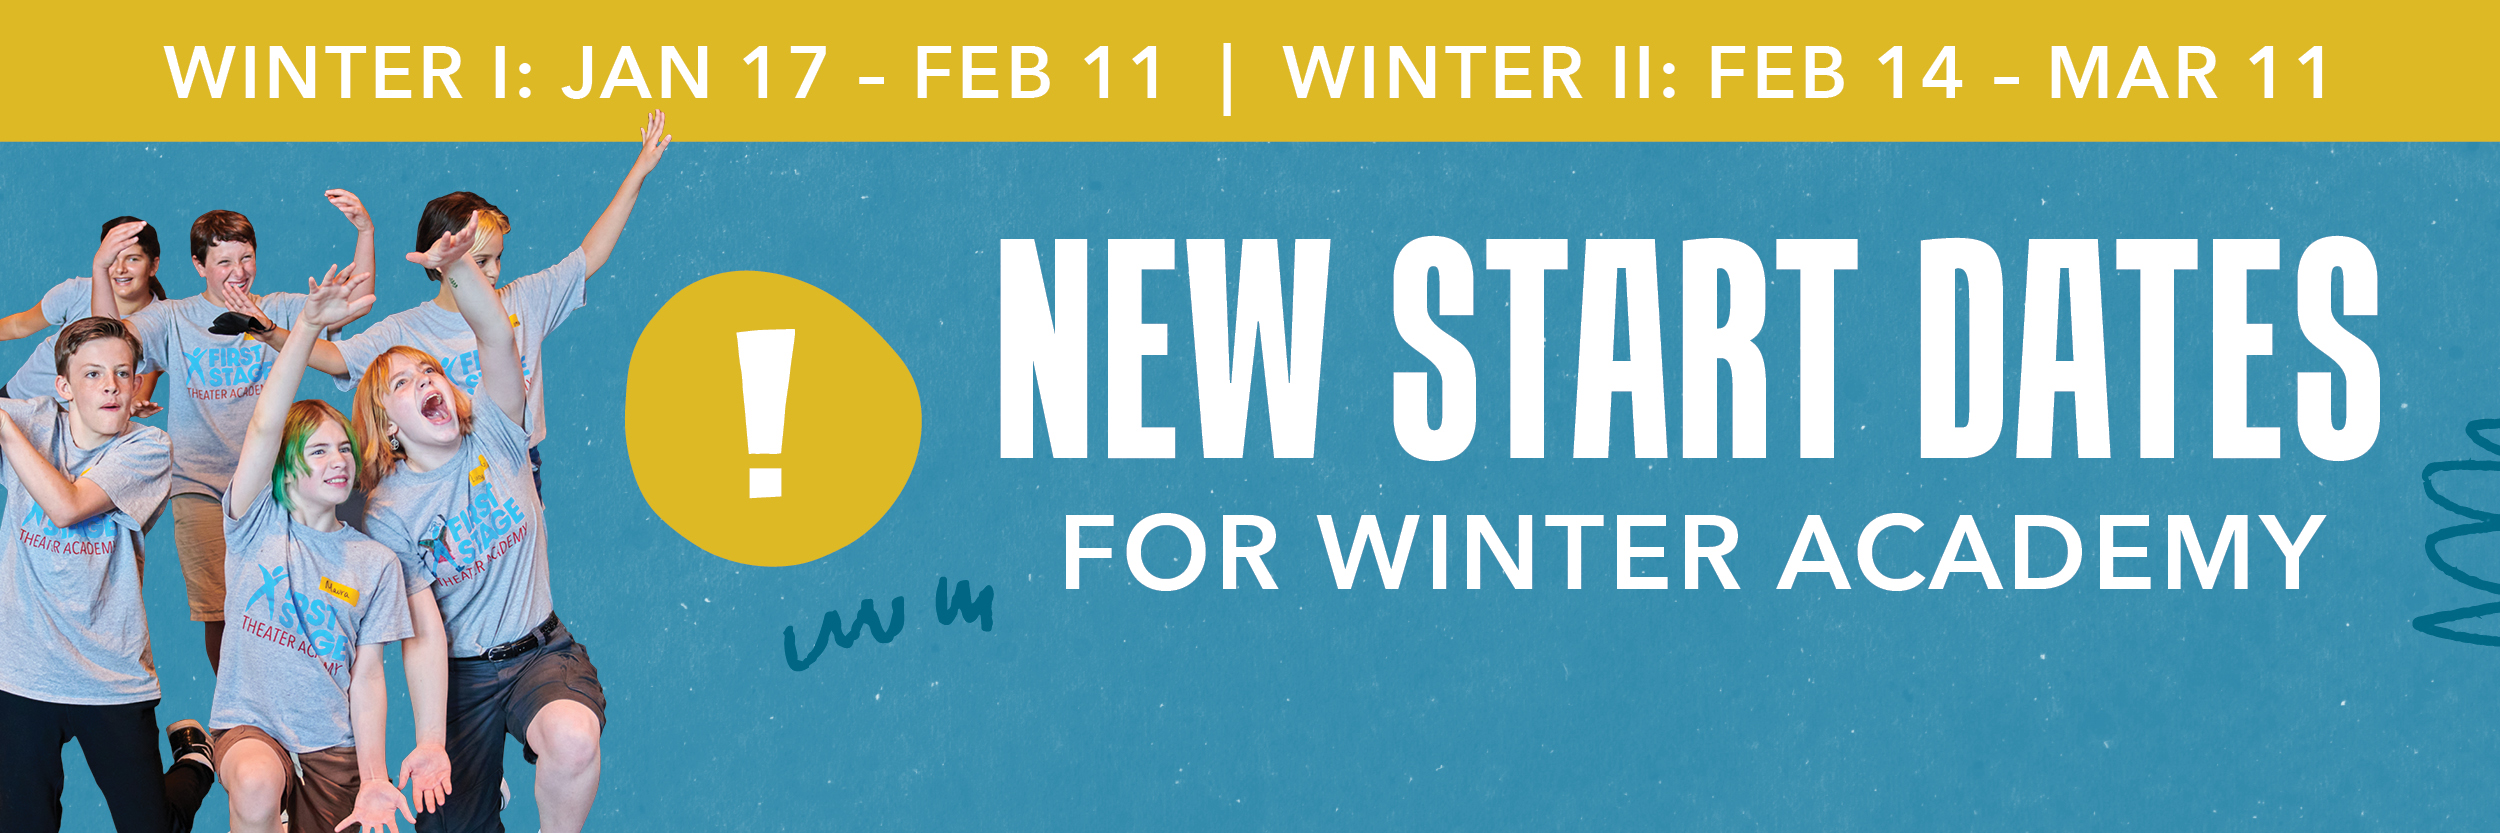 New Start Dates for Winter Academy